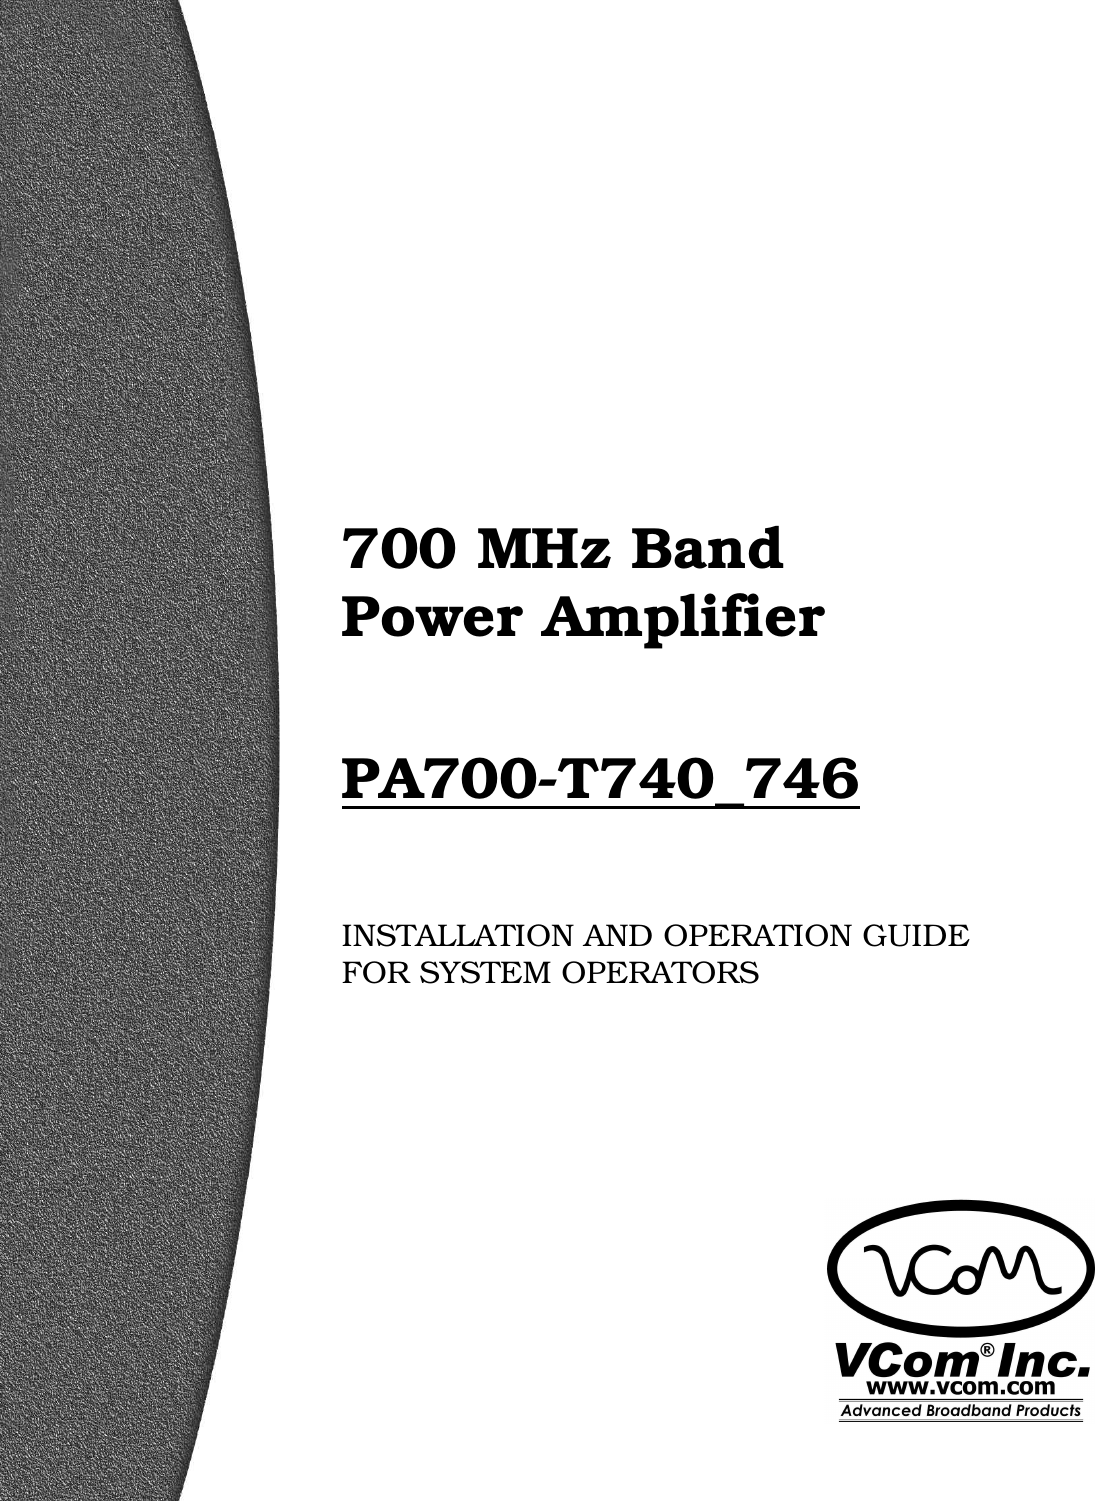                                  700 MHz Band Power Amplifier  PA700-T740_746   INSTALLATION AND OPERATION GUIDE FOR SYSTEM OPERATORS 